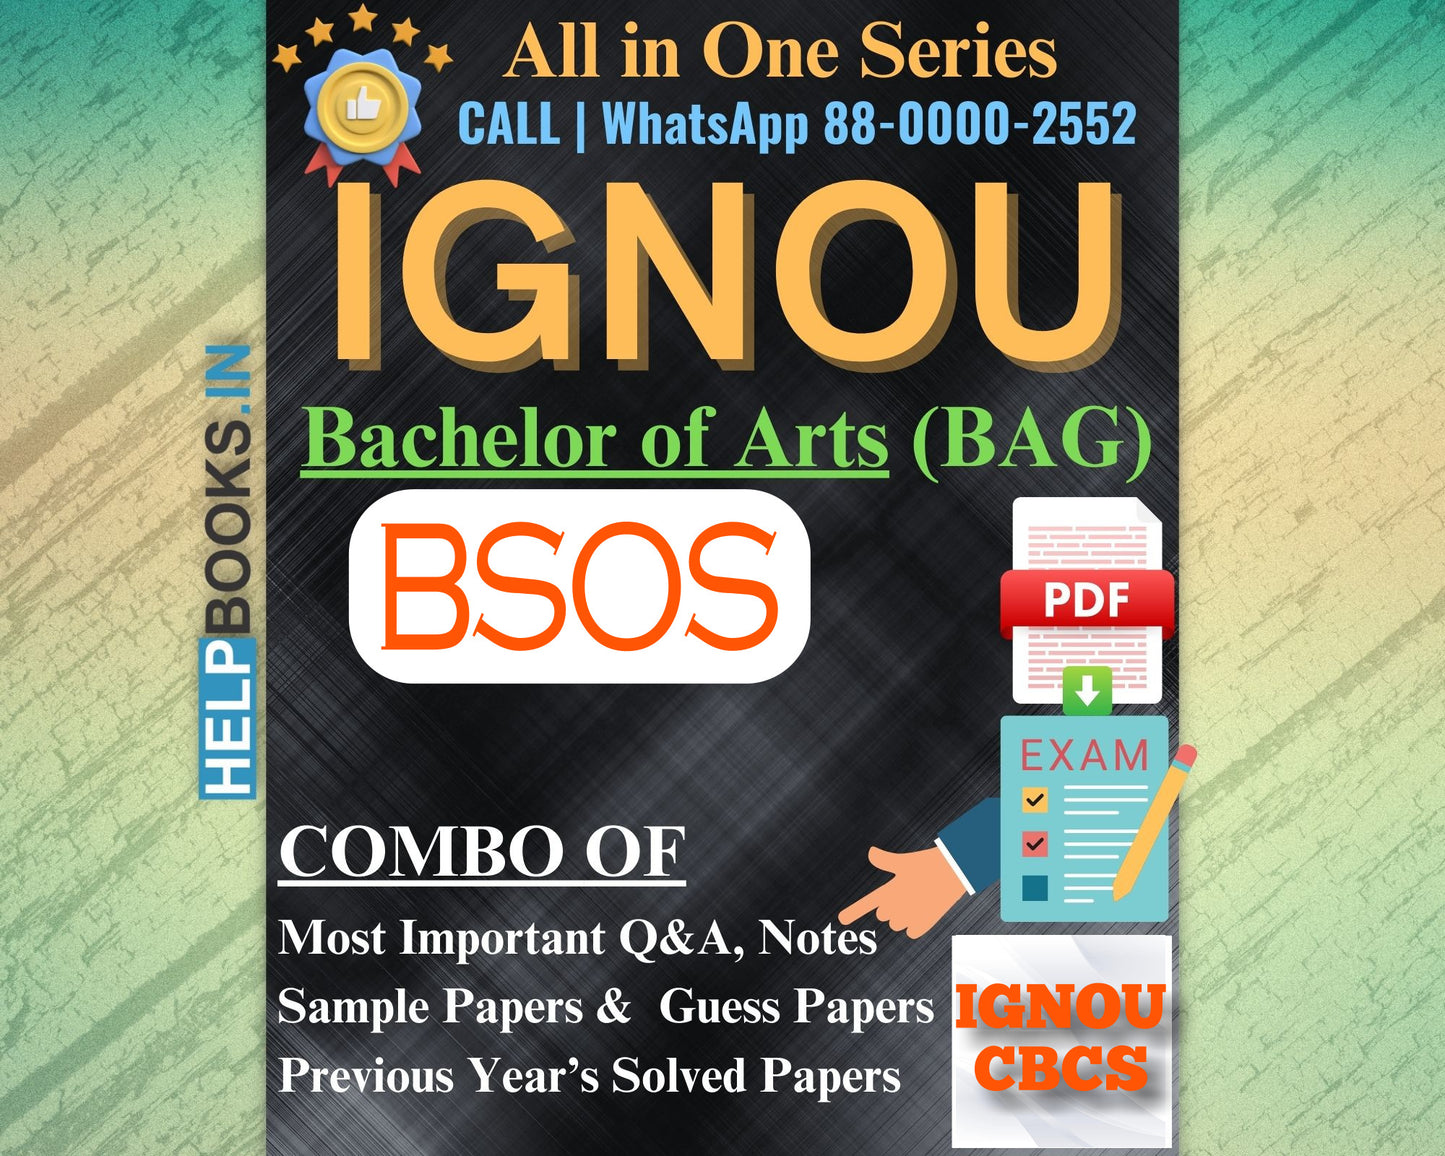 IGNOU BAG Online Study Package: Bachelor of Arts (BA) - Previous Year’s Solved Papers, Q&A, Exam Notes, Sample Papers, Guess Papers-BSOS184, BSOS185